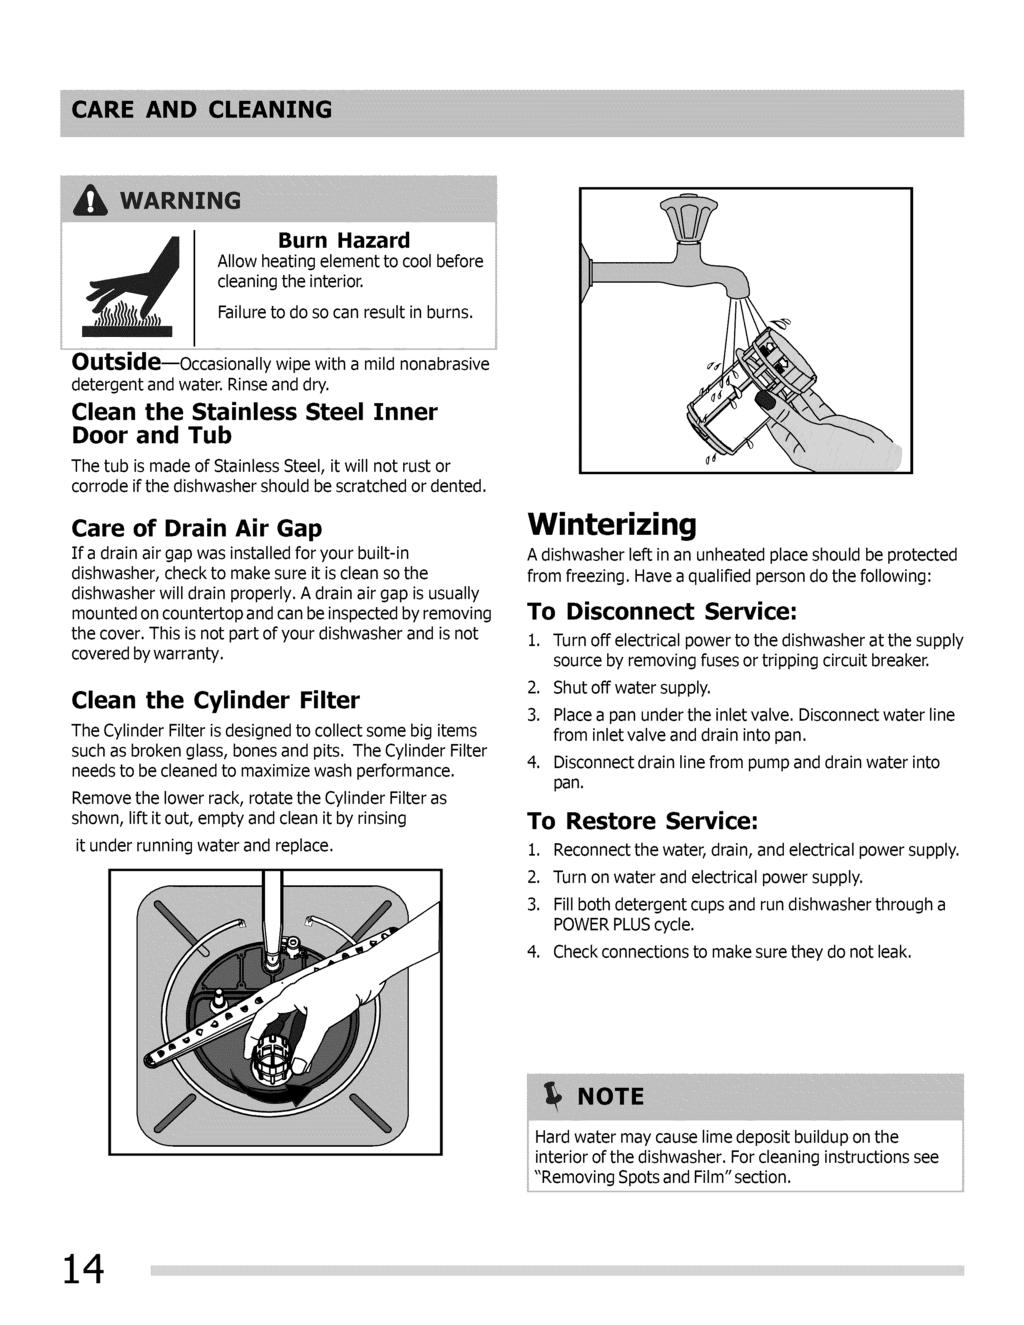 Burn Hazard Allow heating element to cool before cleaning the interior. Failure to do so can result in burns. Outside--Occasionally wipe with a mild nonabrasive detergent and water. Rinse and dry.